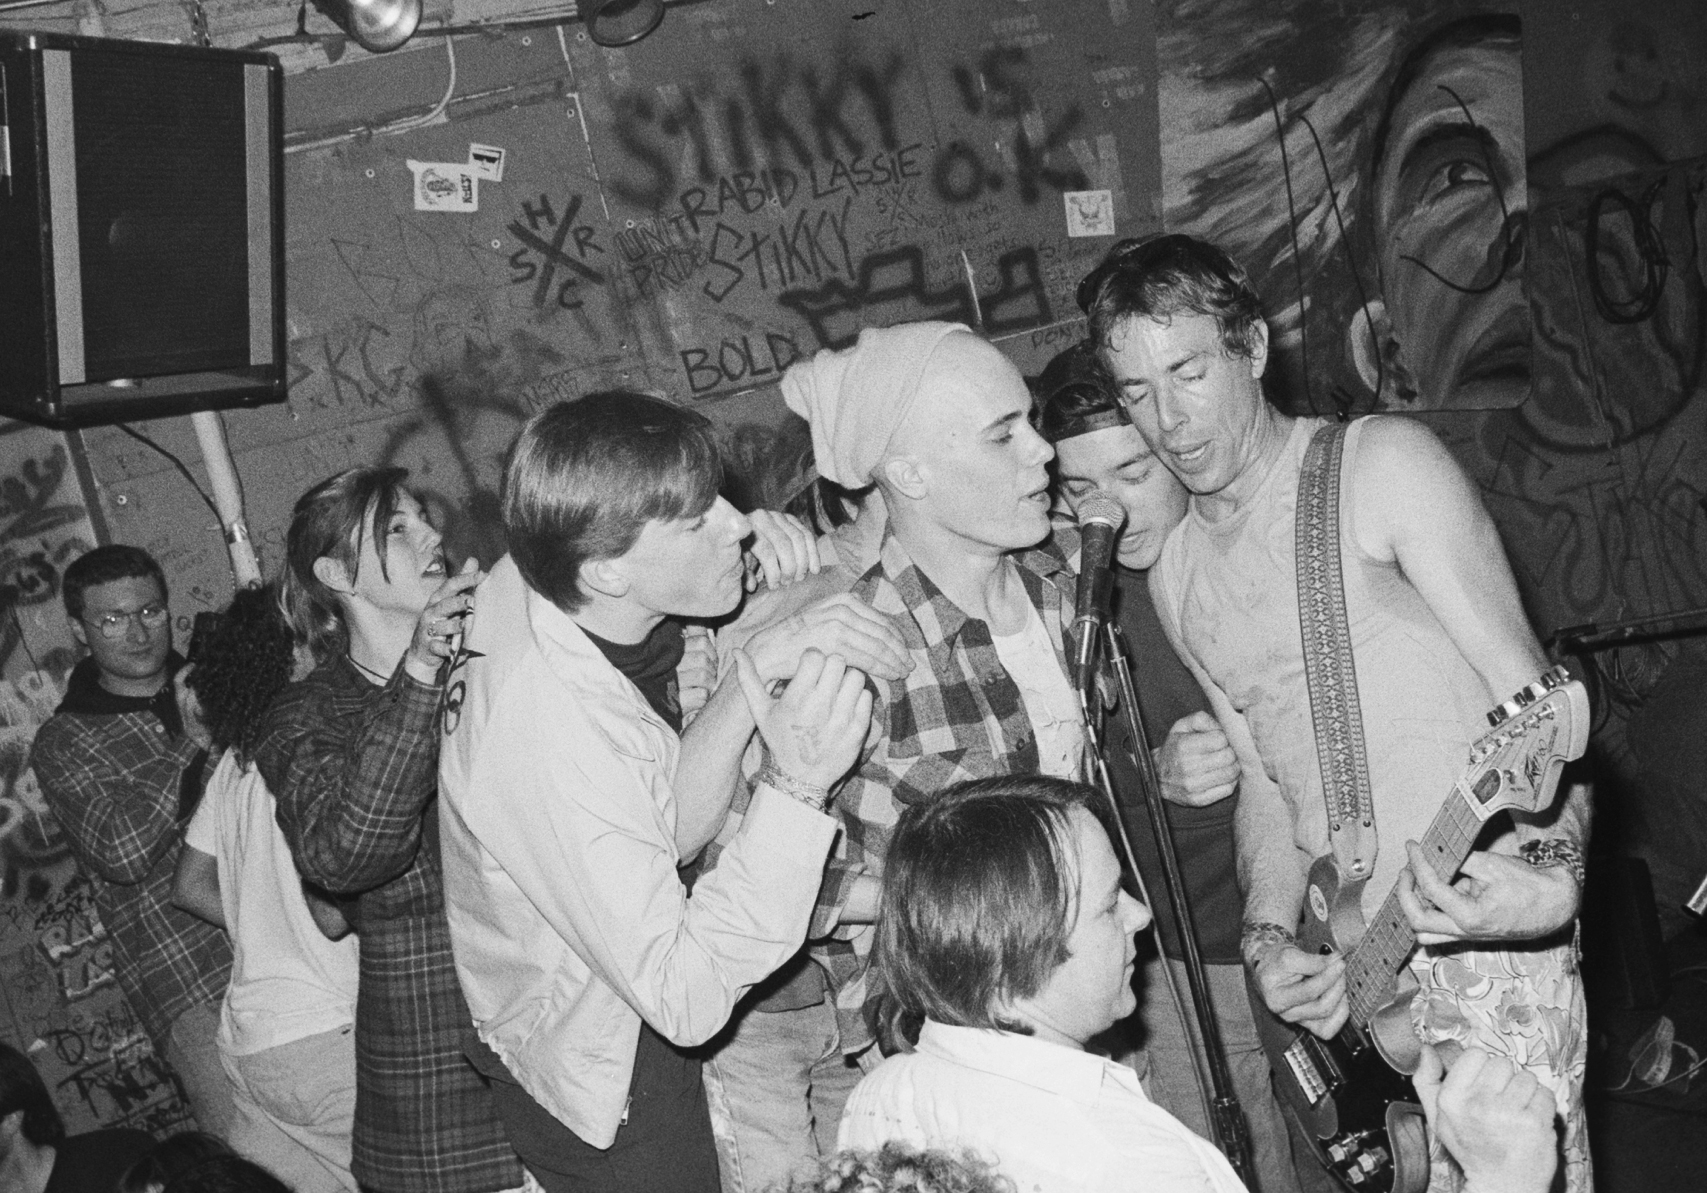 Larry Livermore, right, performs at 924 Gilman Street in this undated photo.